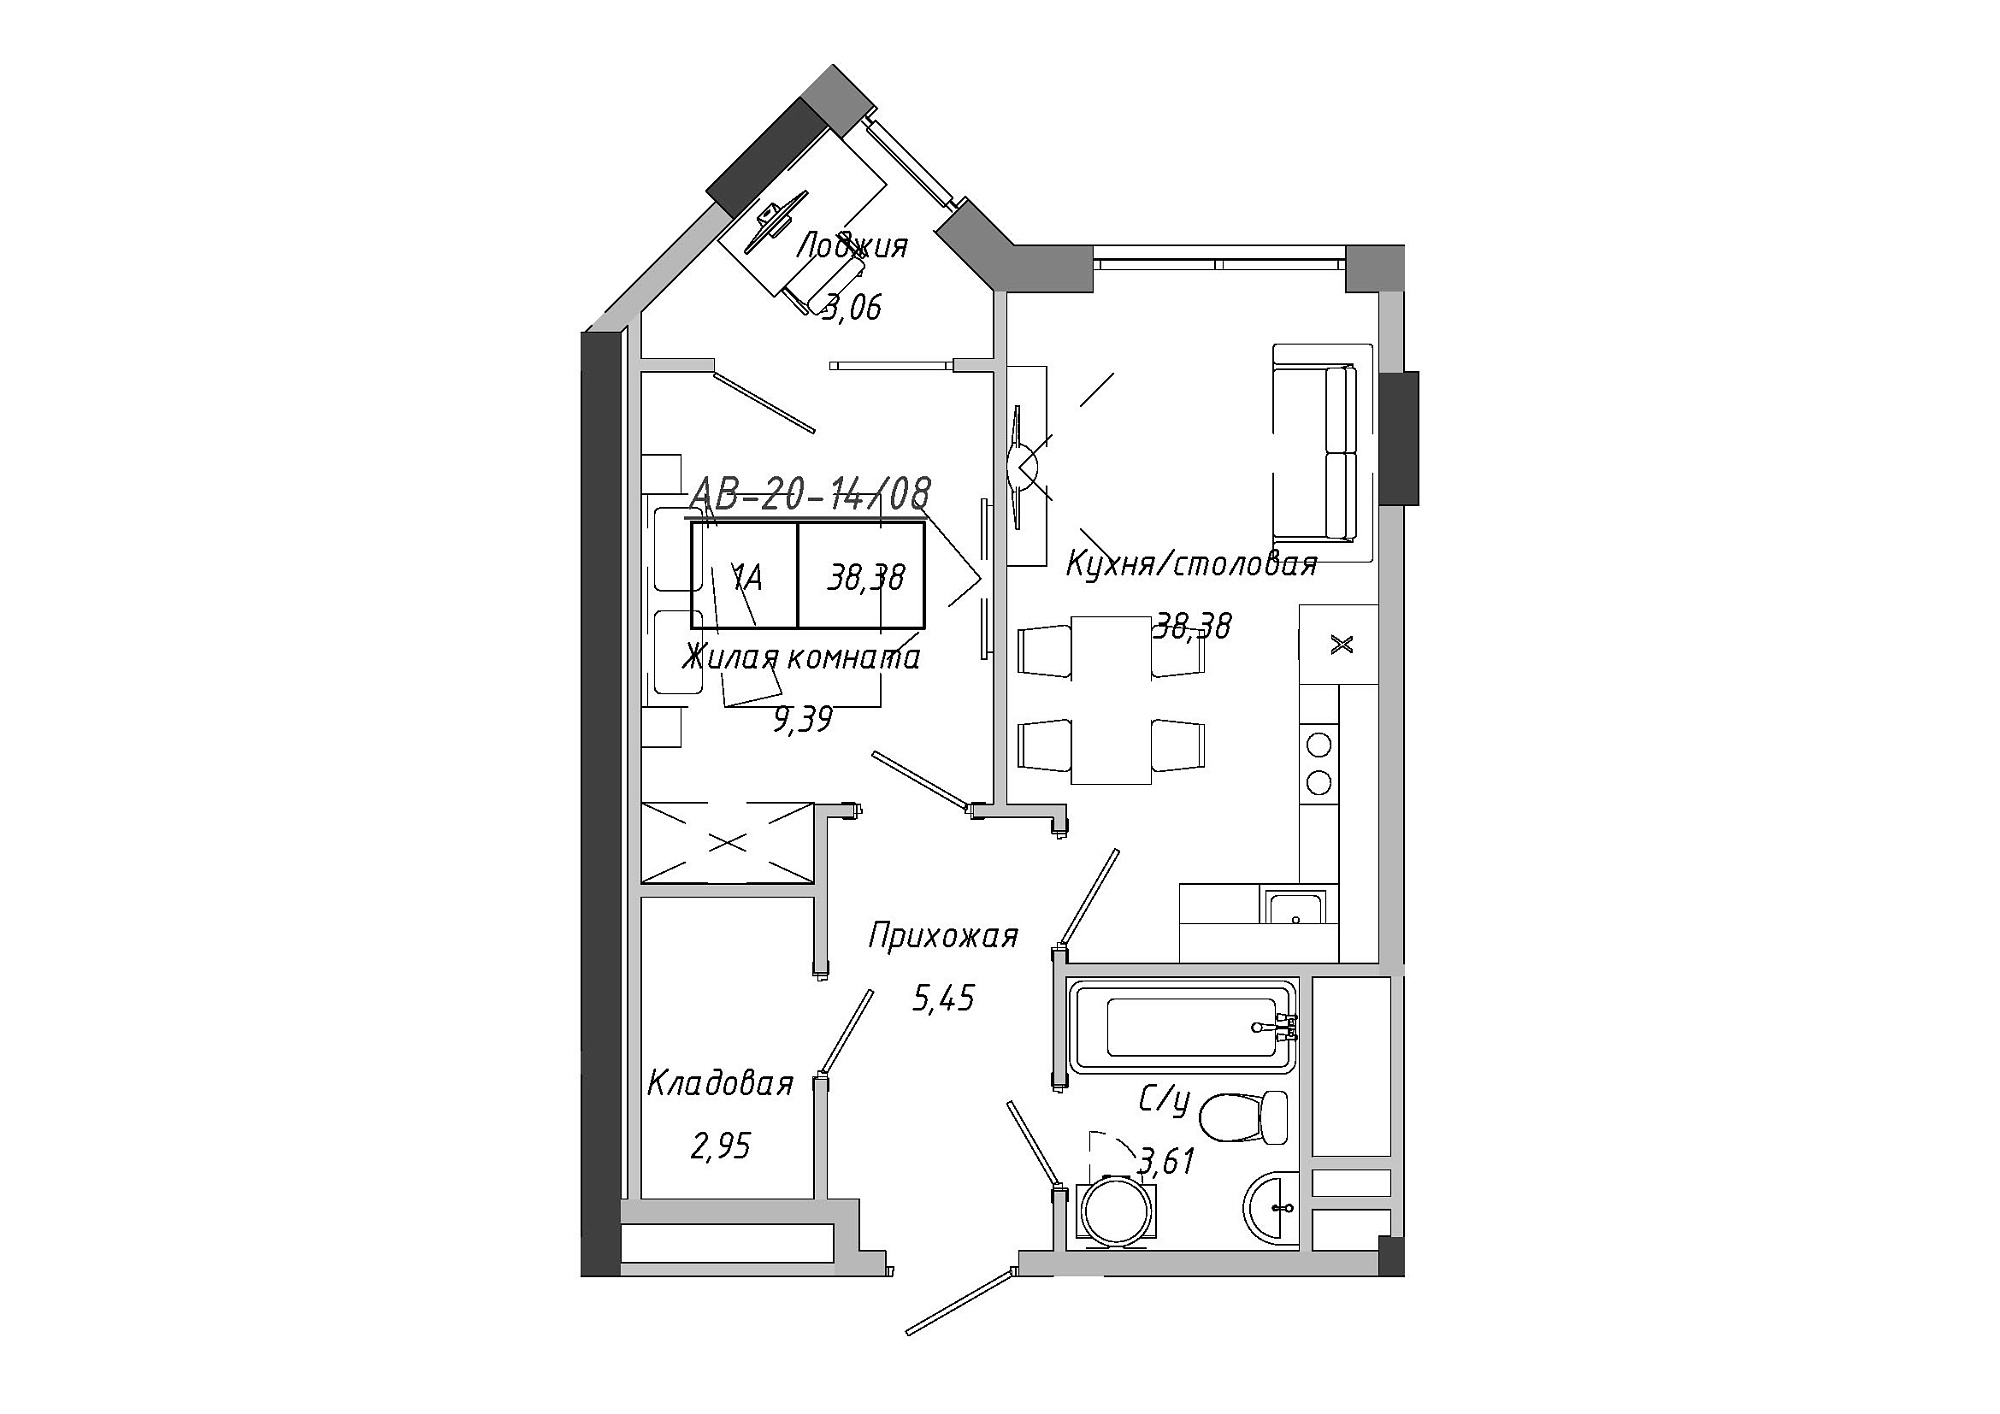 Planning 1-rm flats area 38.38m2, AB-20-14/00108.